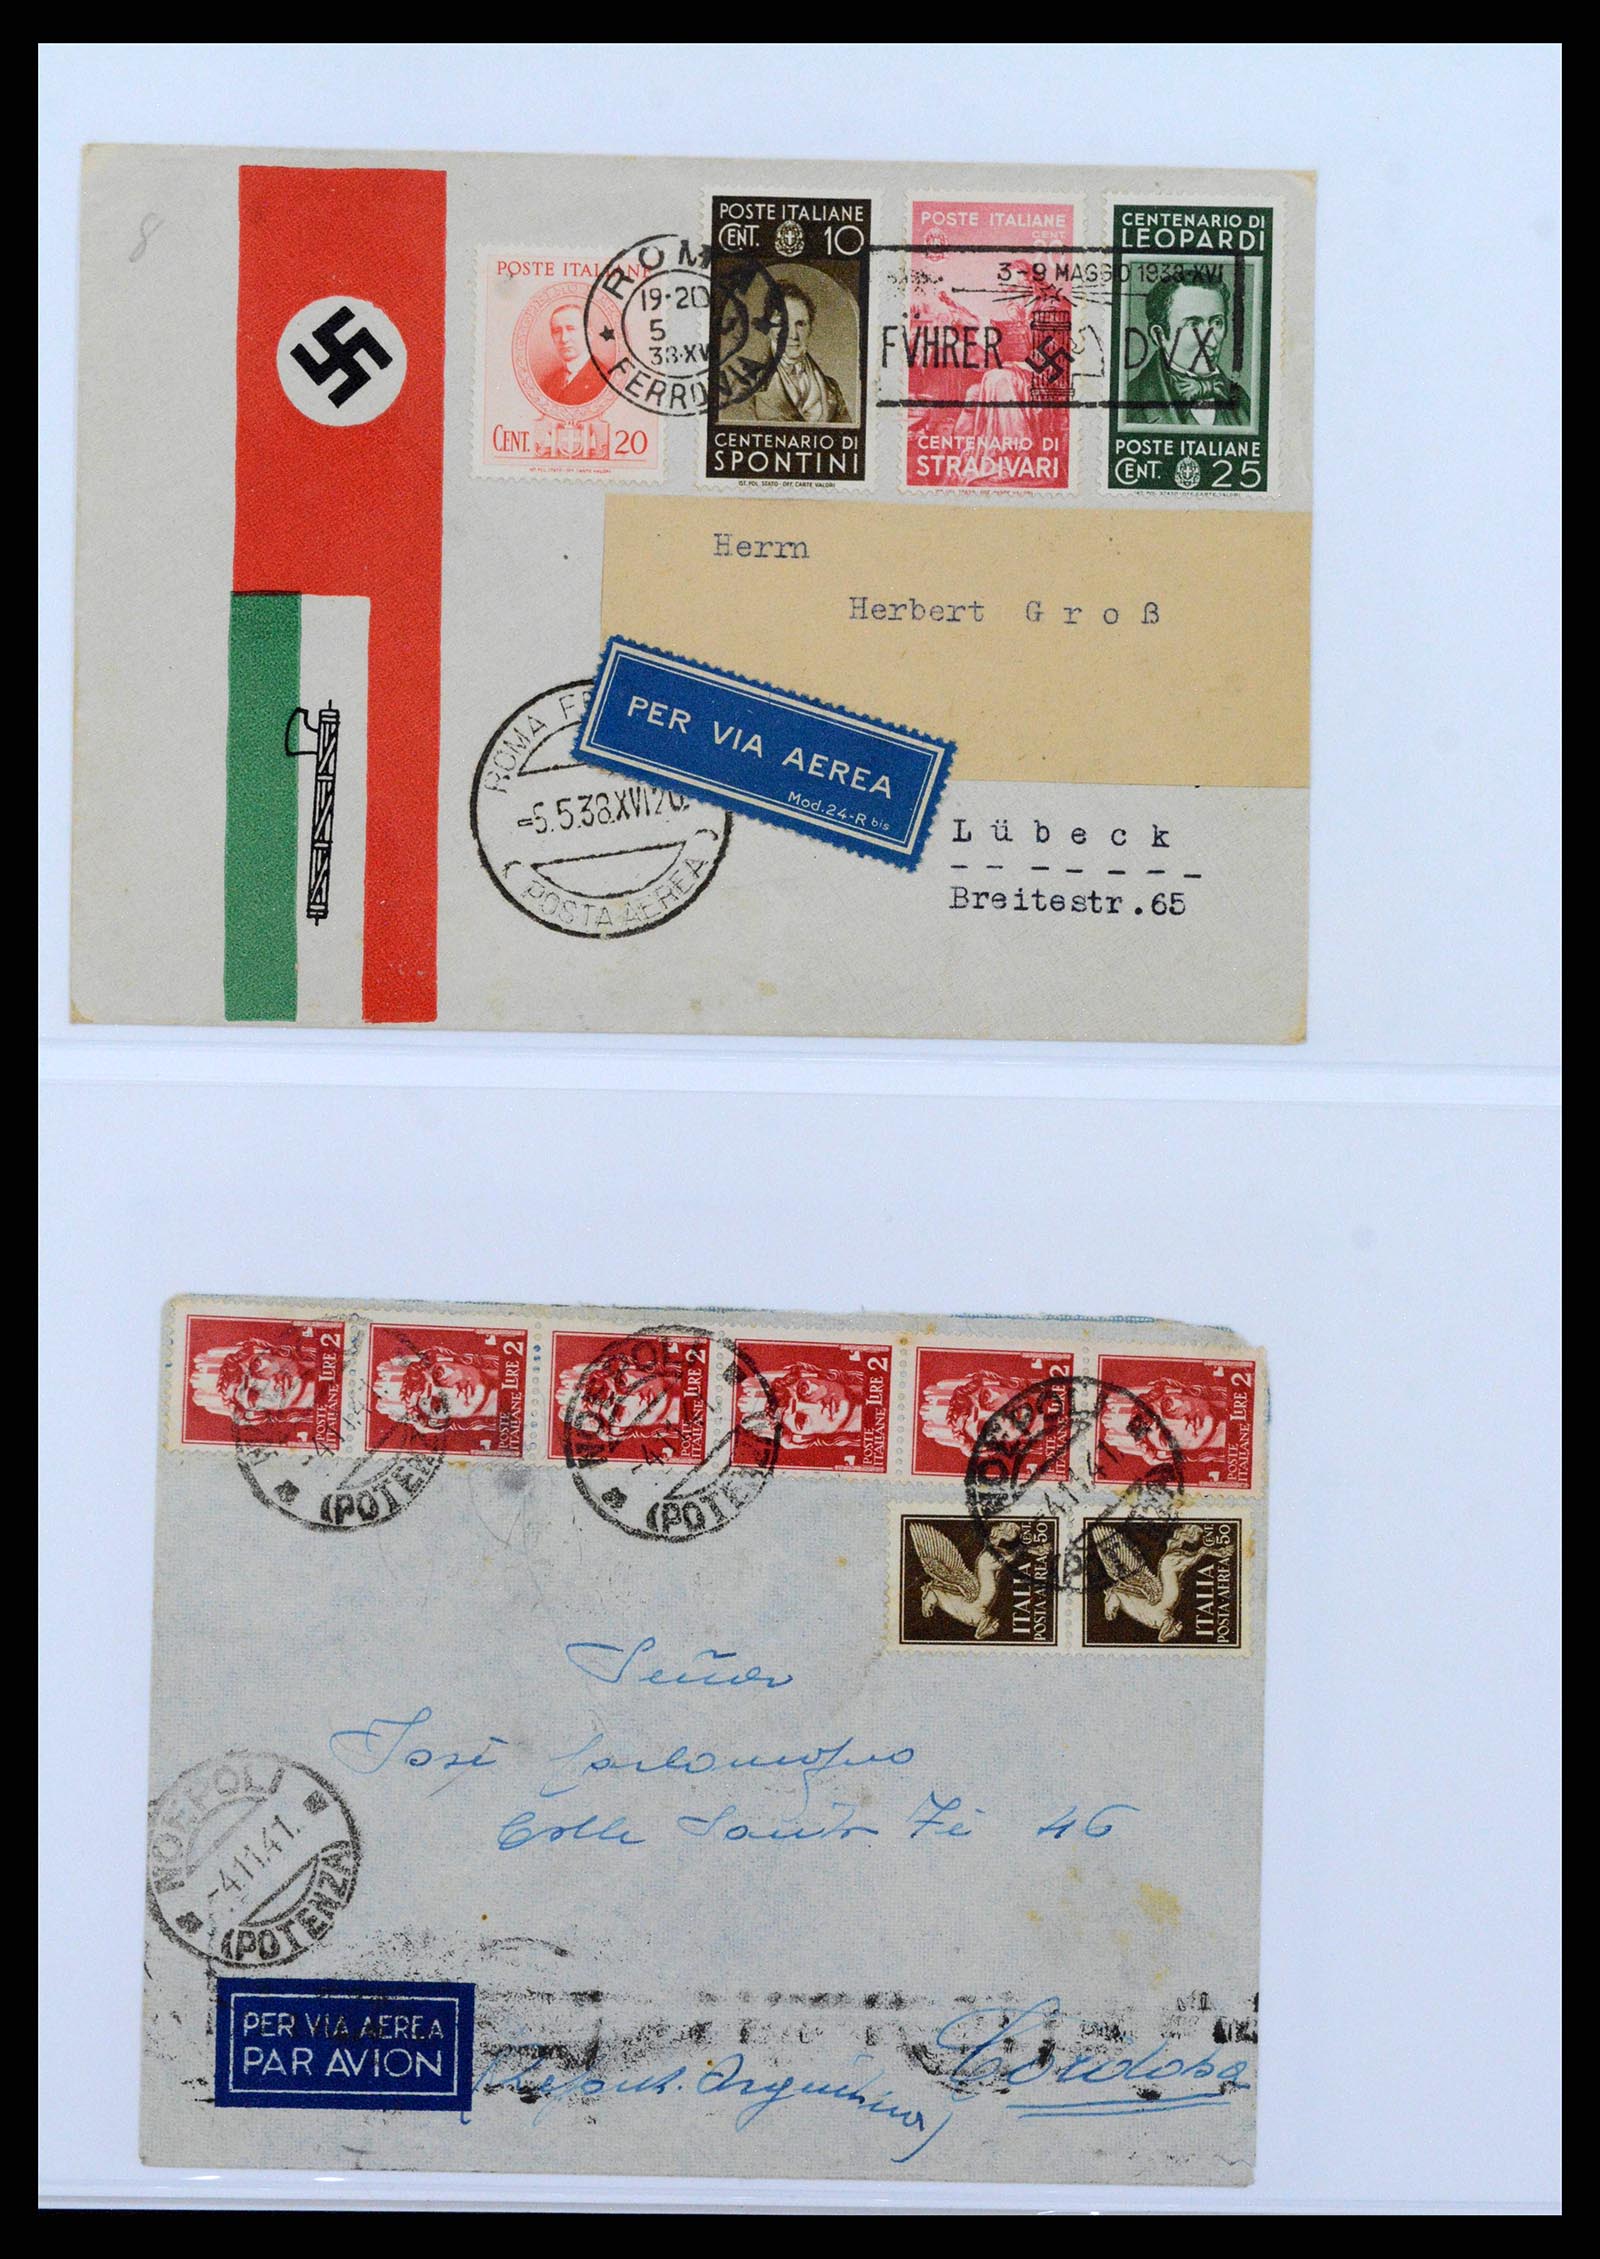 38872 0007 - Stamp collection 38872 Italy airmail covers 1930-1943.